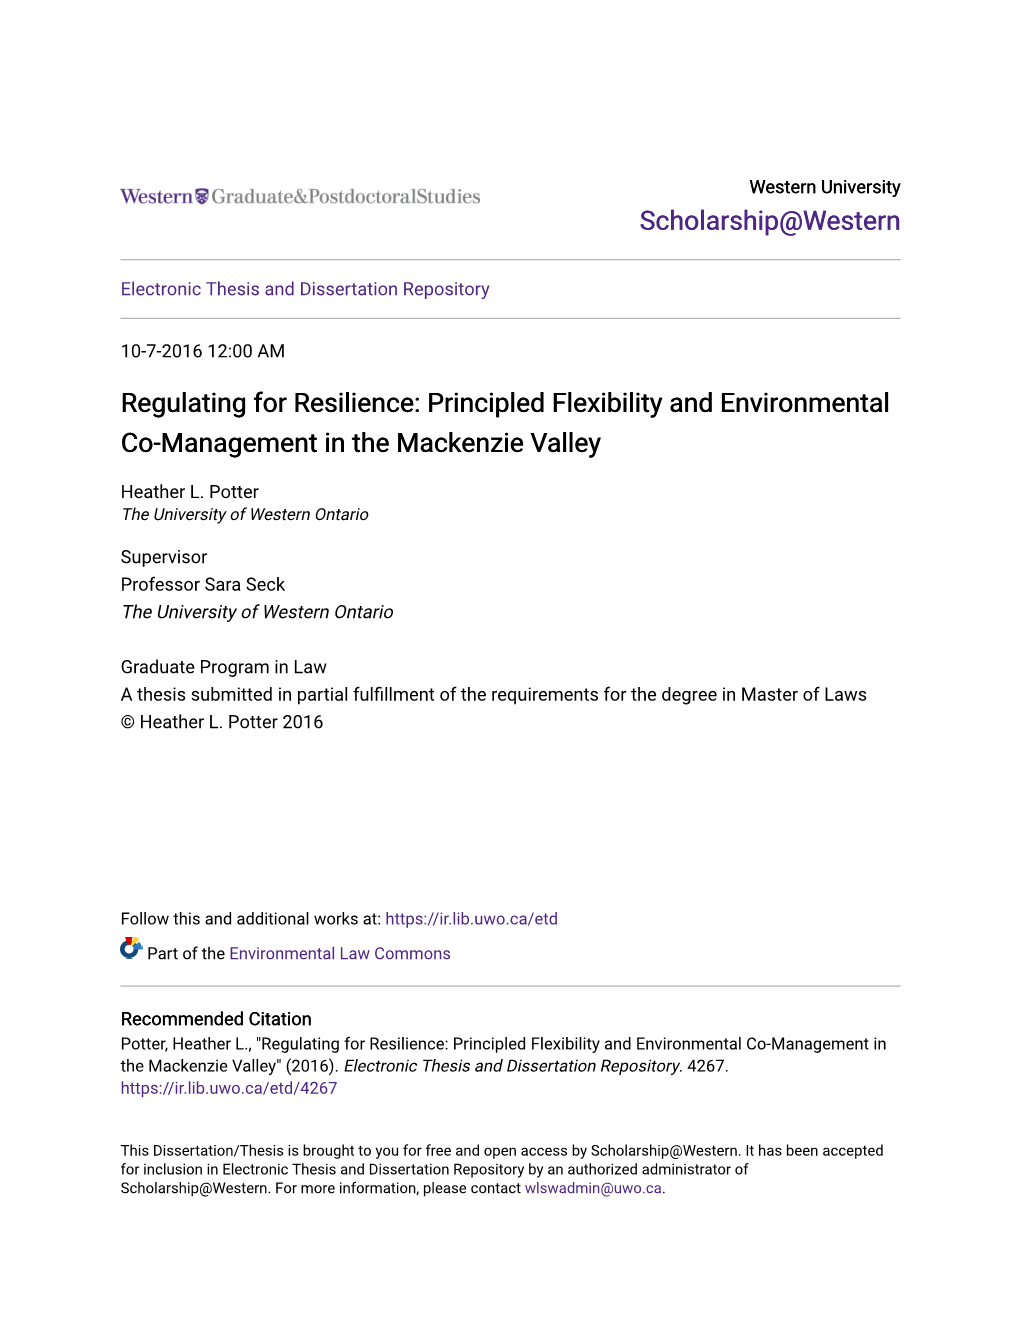 Principled Flexibility and Environmental Co-Management in the Mackenzie Valley